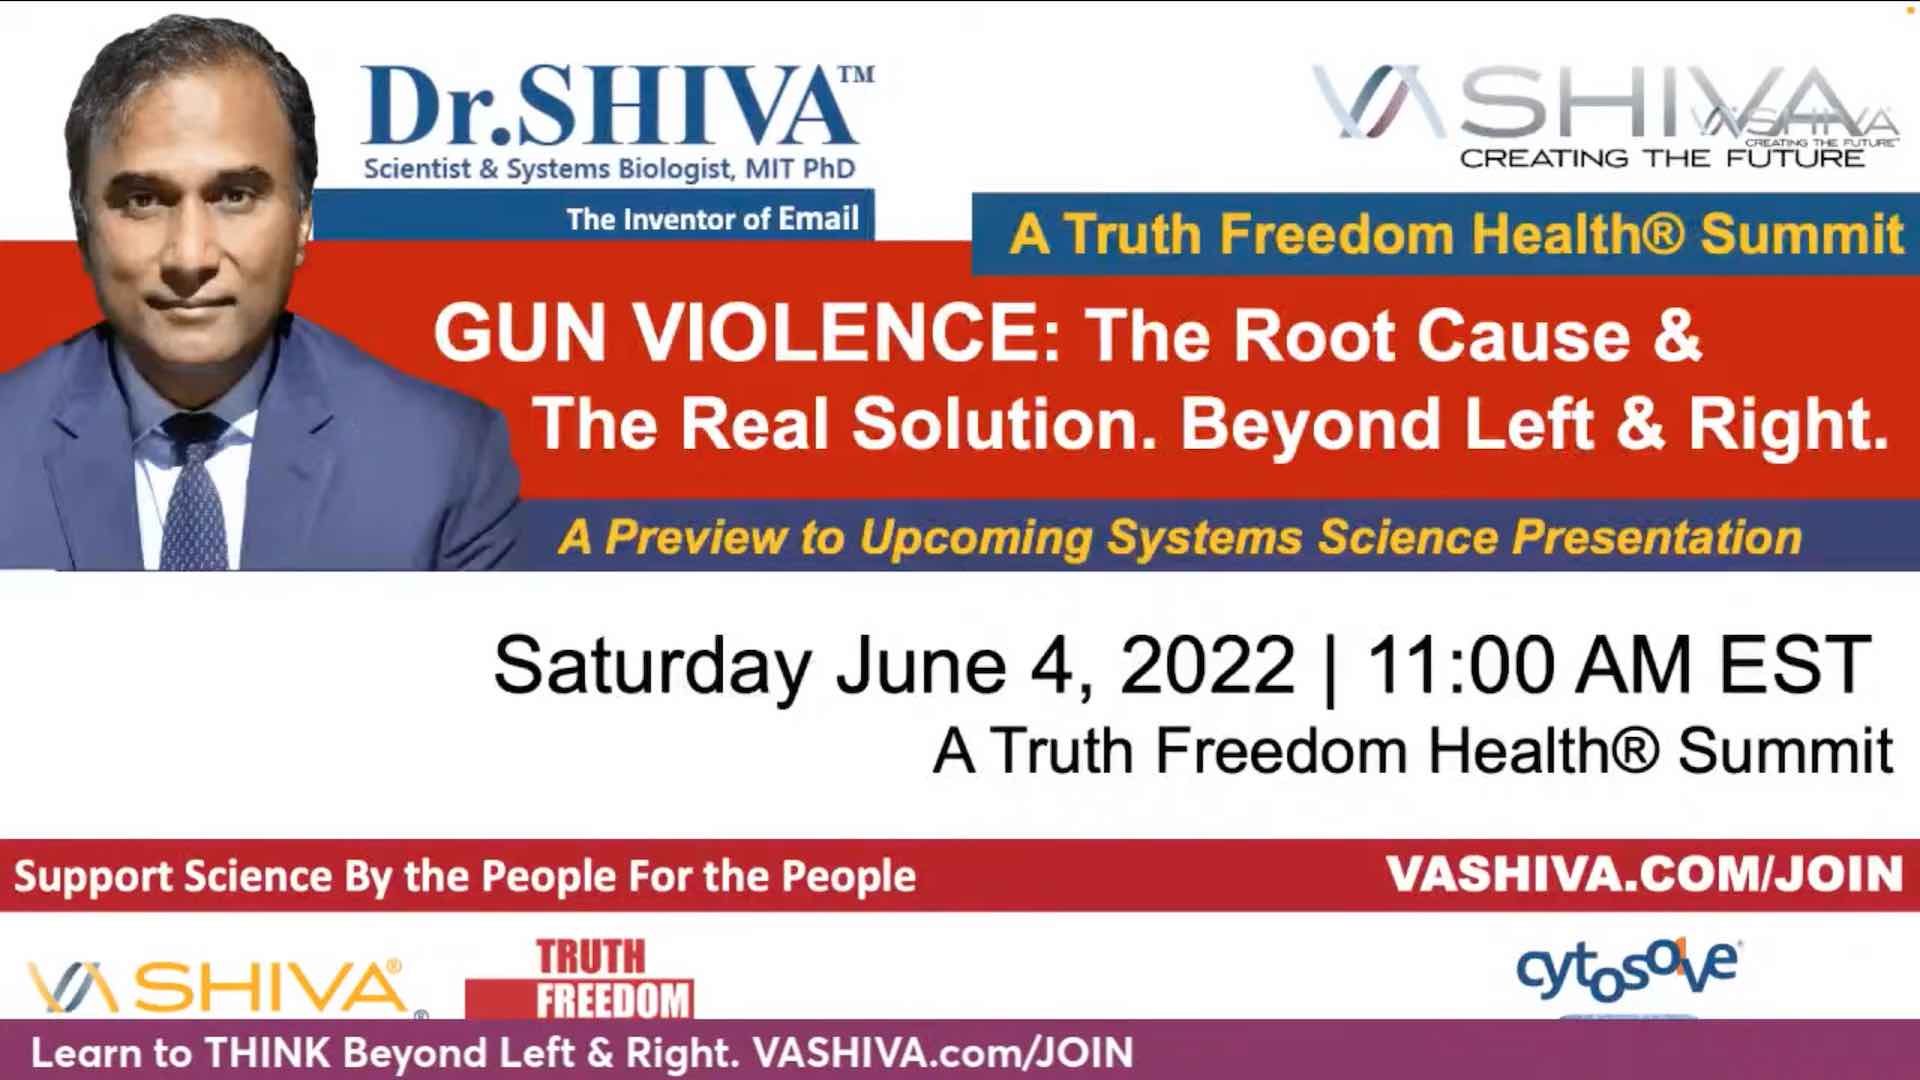 Dr.SHIVA LIVE:  GUN Violence: Root Cause & Real Solution. Summit Preview. Beyond Left & Right.